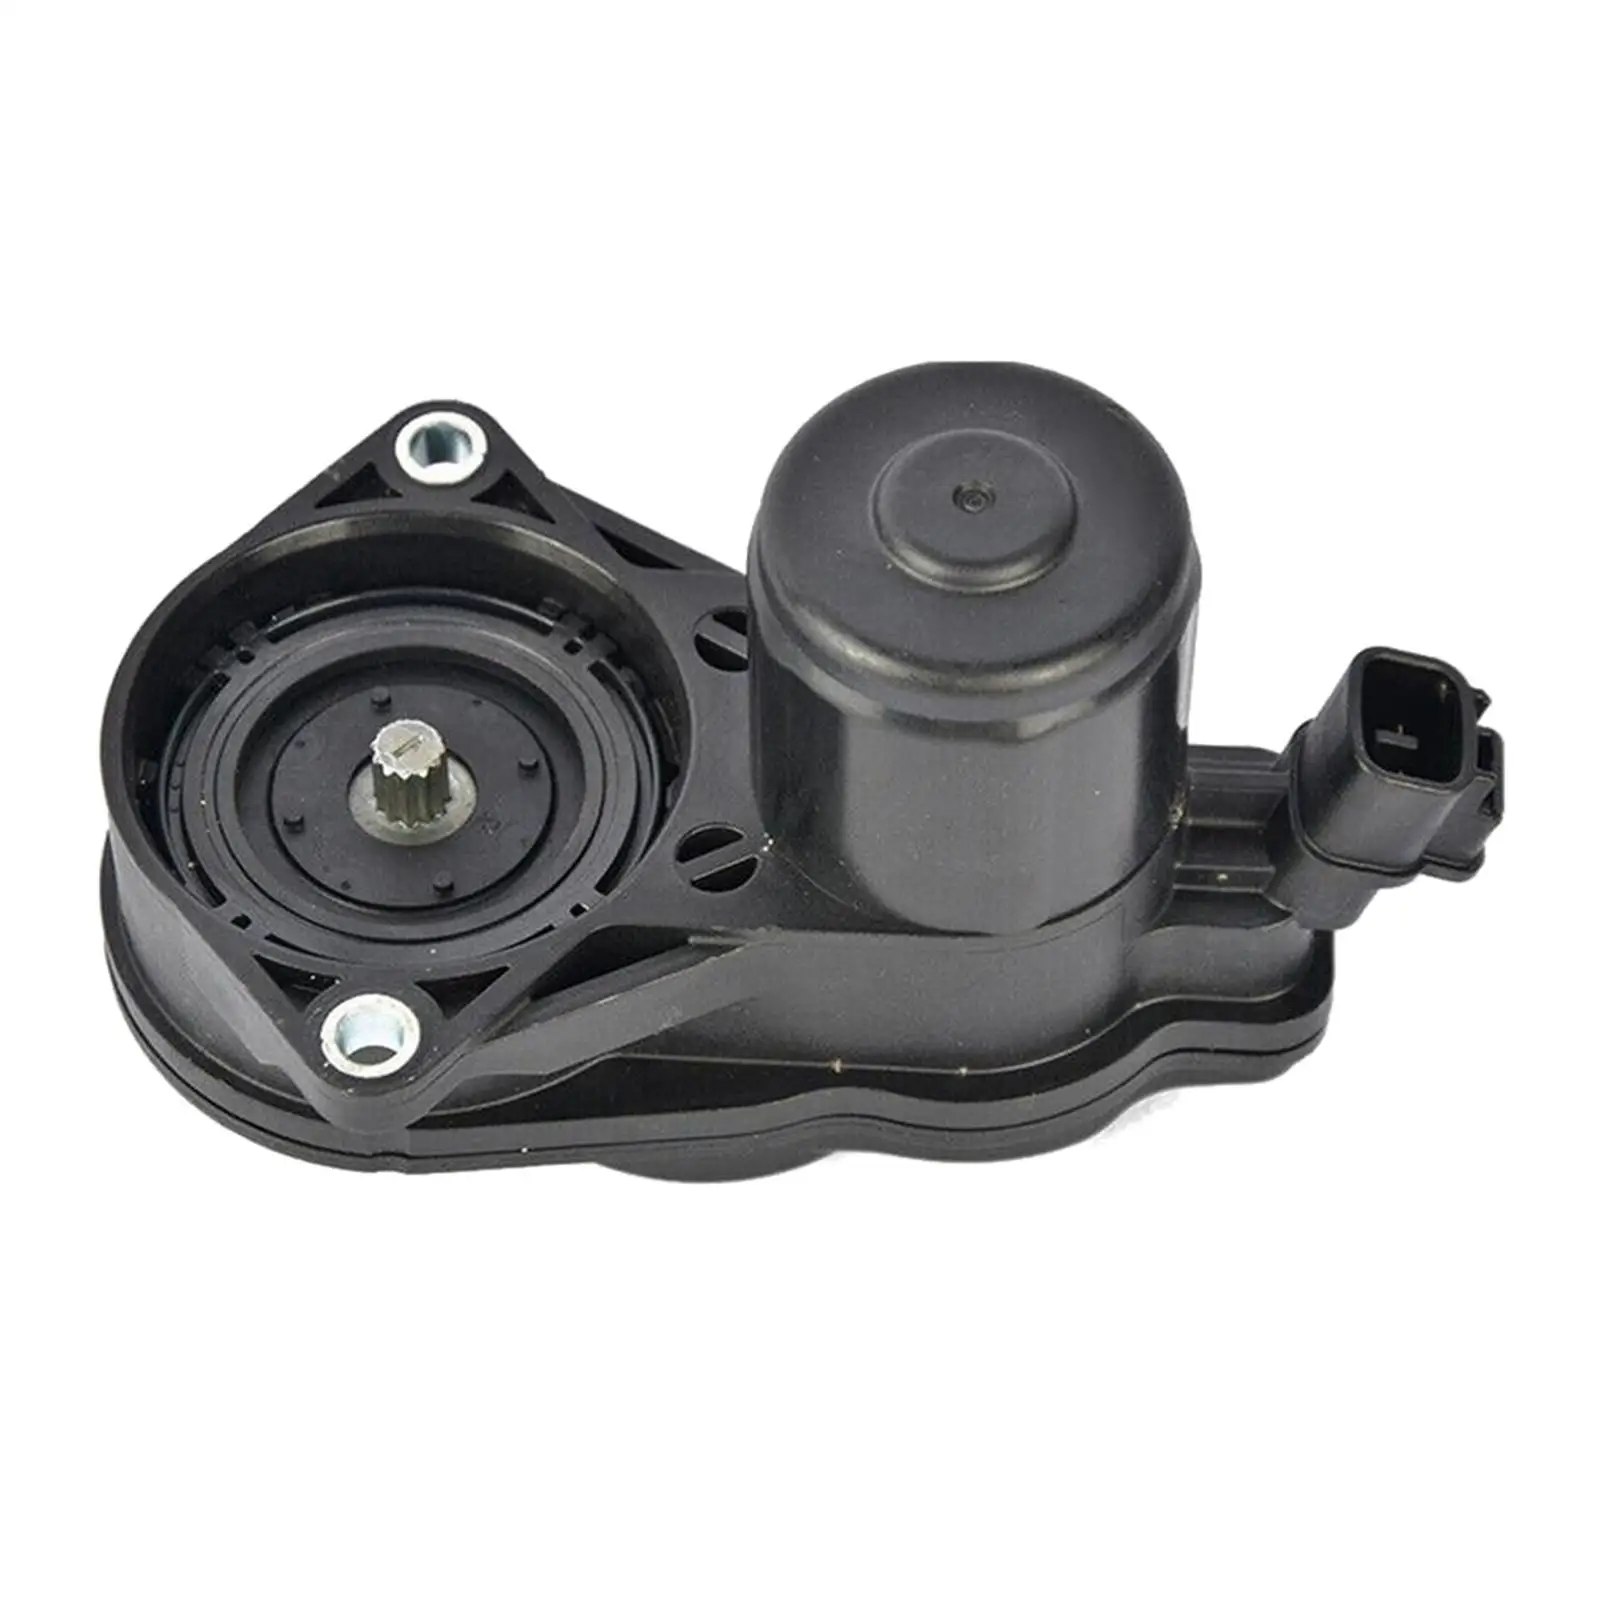 Parking Brake Actuator Car Accessories 46310-33010 Replaces for Toyota Venza for camry for sienna Corolla Hatchback